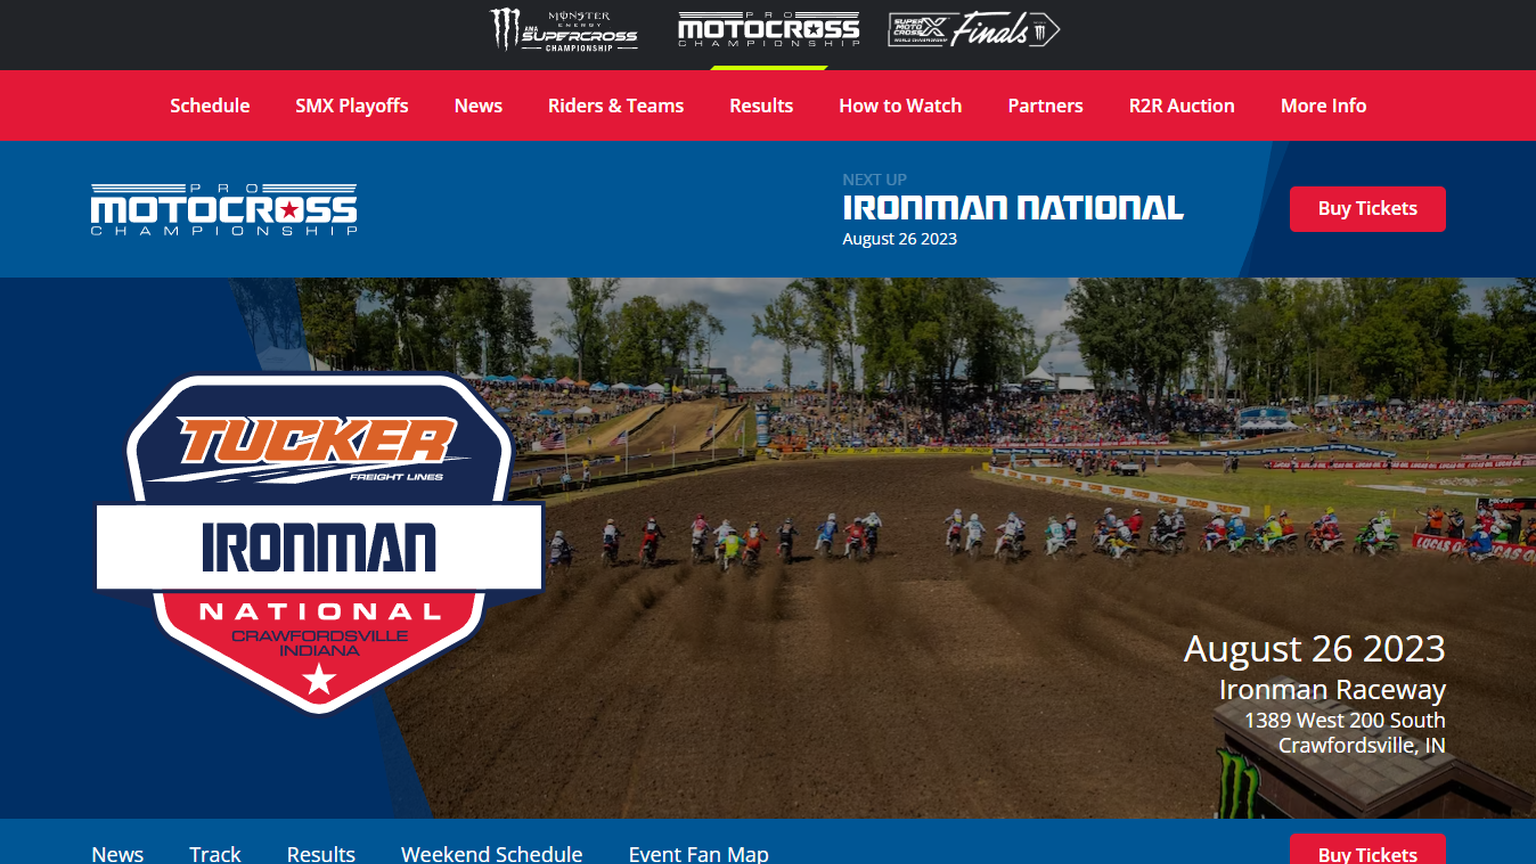 How to Watch 2023 Pro Motocross Ironman National Live Without Cable